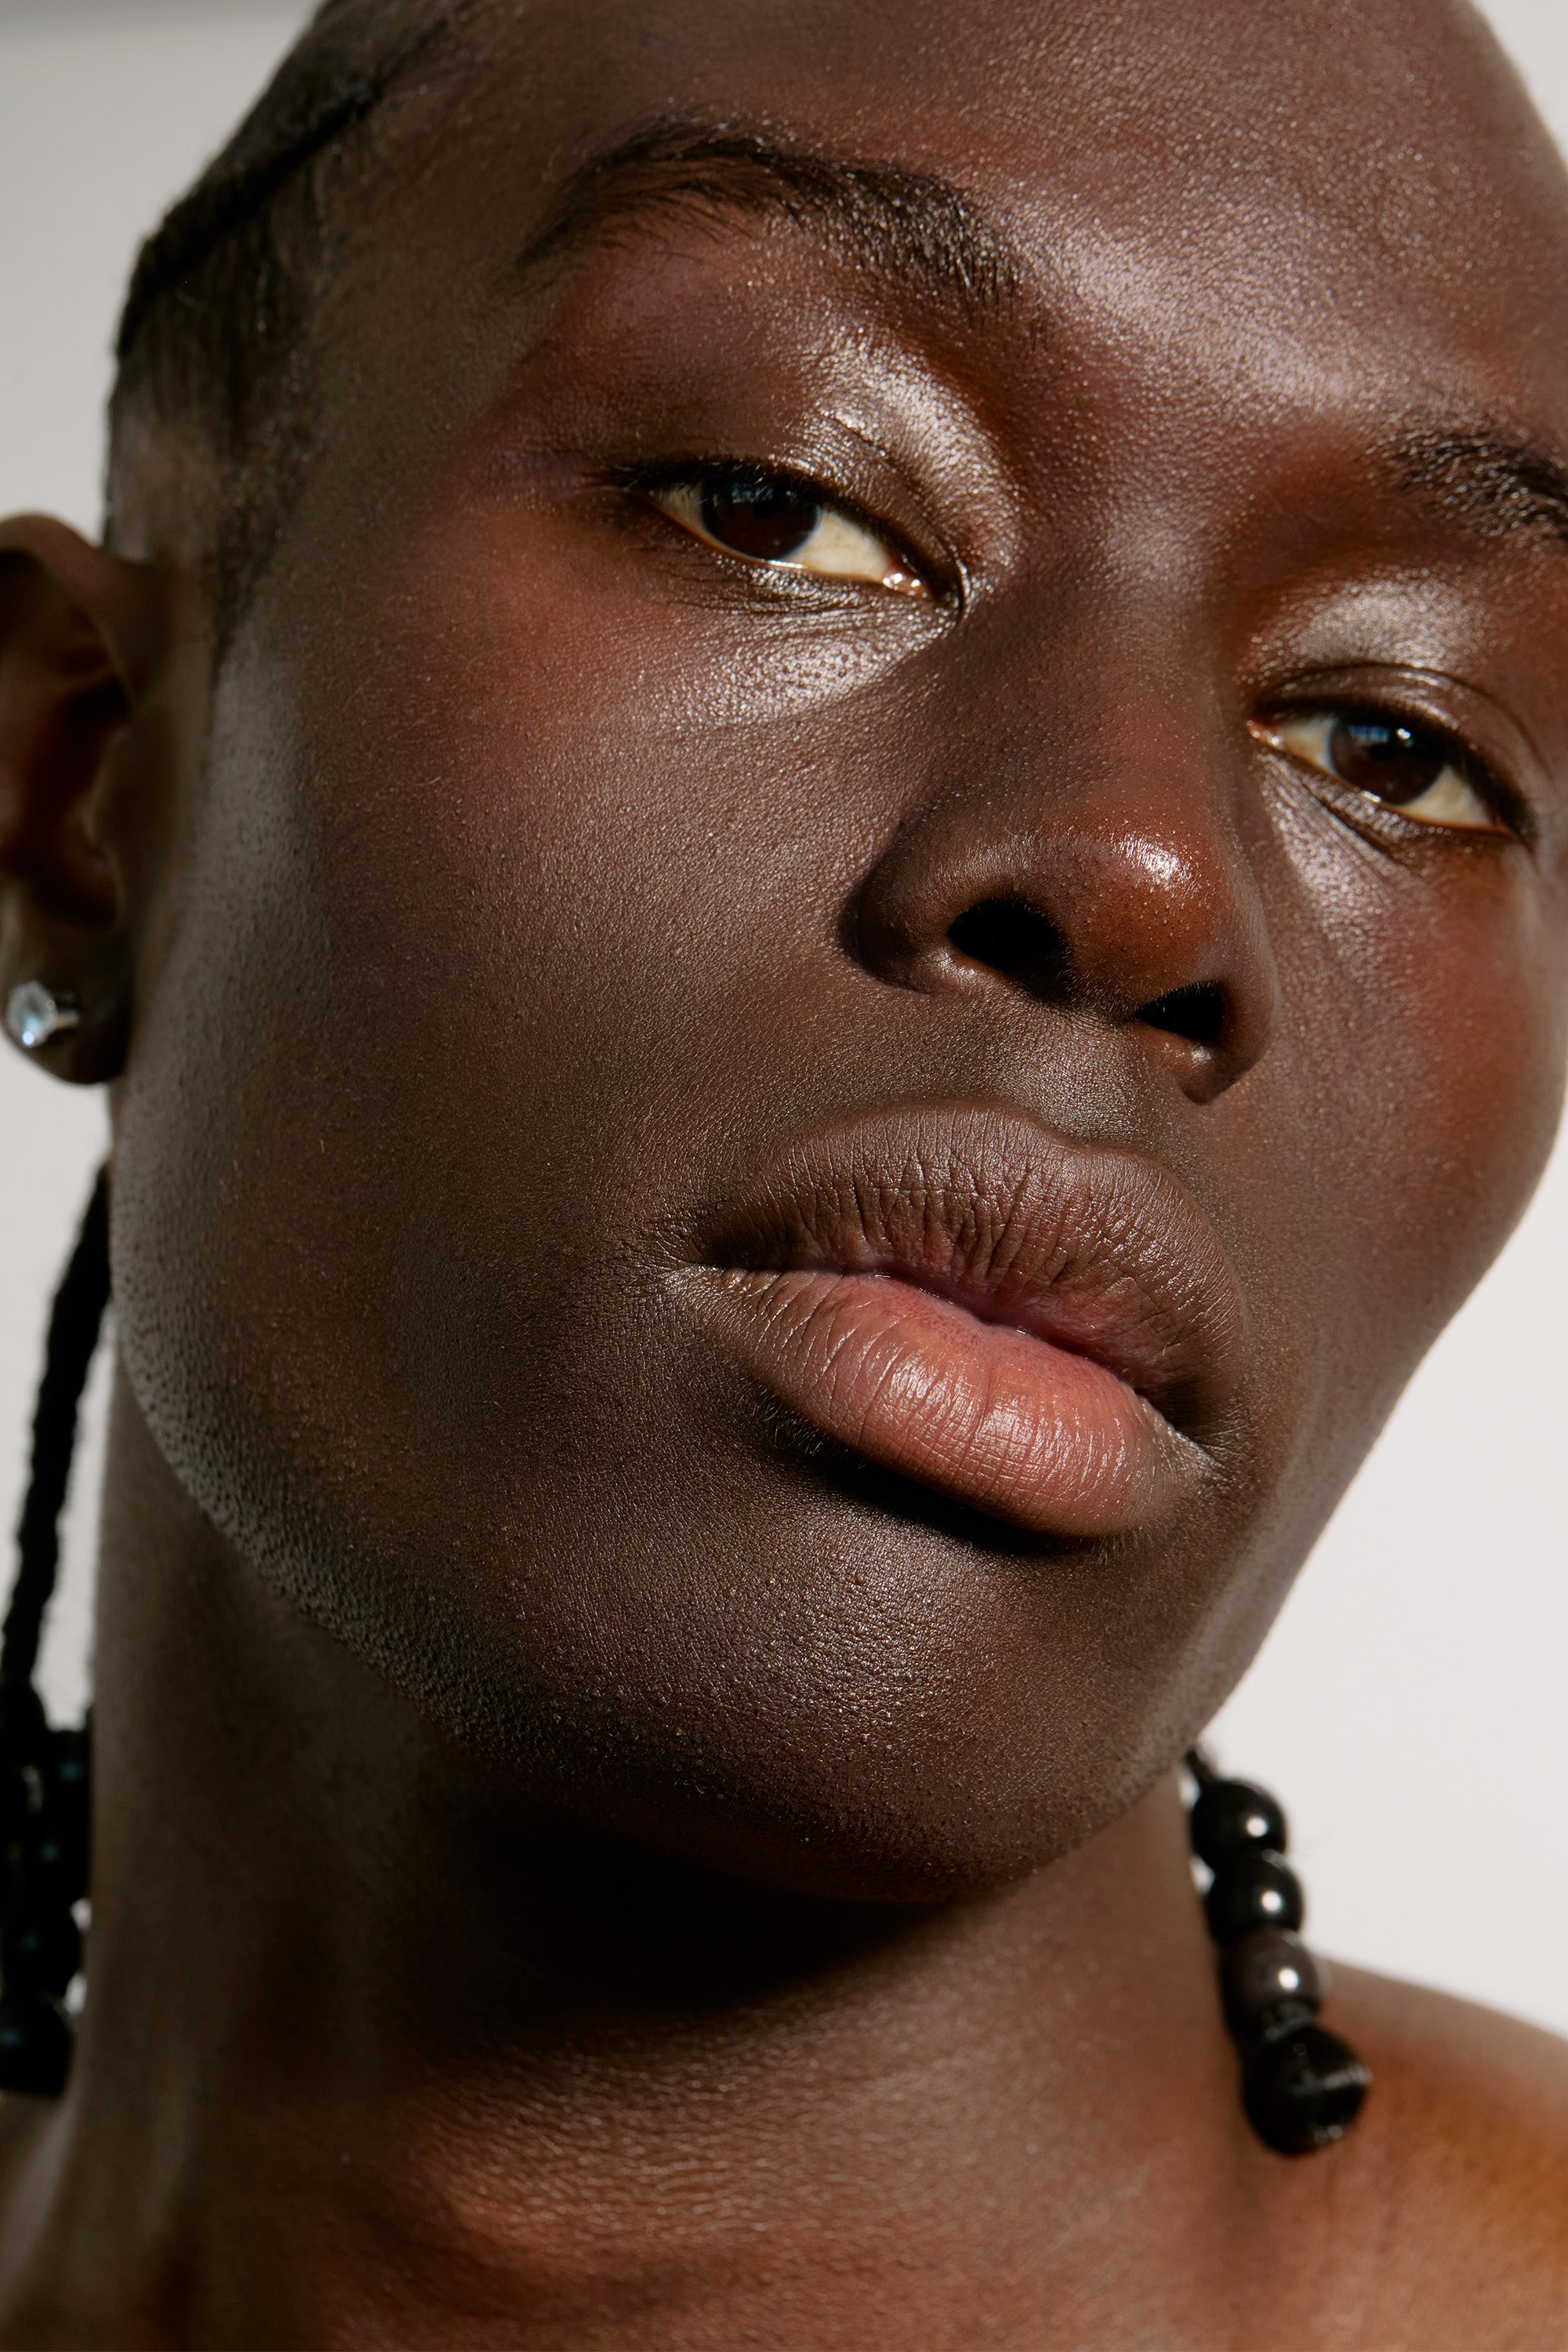 Close-up portrait of a person with dark skin, braided hair adorned with beads, and wearing a small earring. Their head is tilted slightly, reflecting the calm confidence of someone who values self-care. The background is plain white, emphasizing their serene expression and radiant complexion likely nourished by Daily System from Freaks of Nature Skincare.